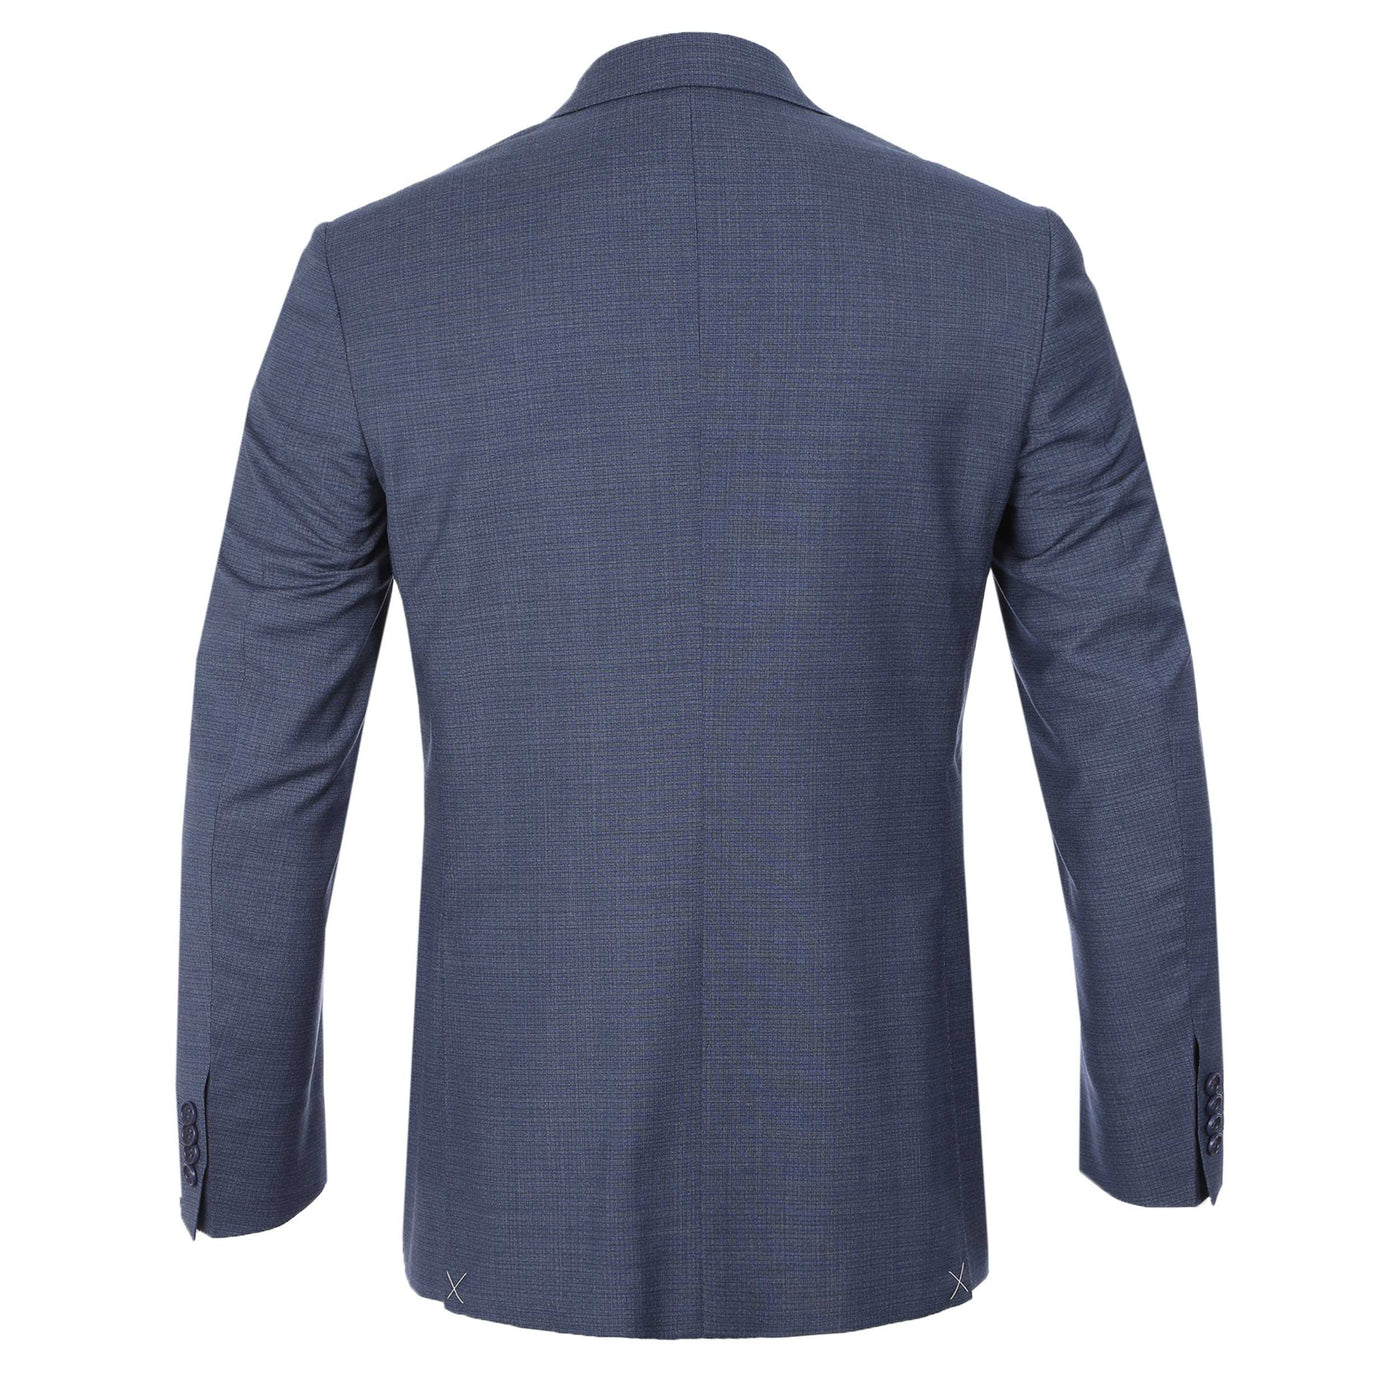 Canali Microweave Notch Lapel Suit in Airforce Blue Back